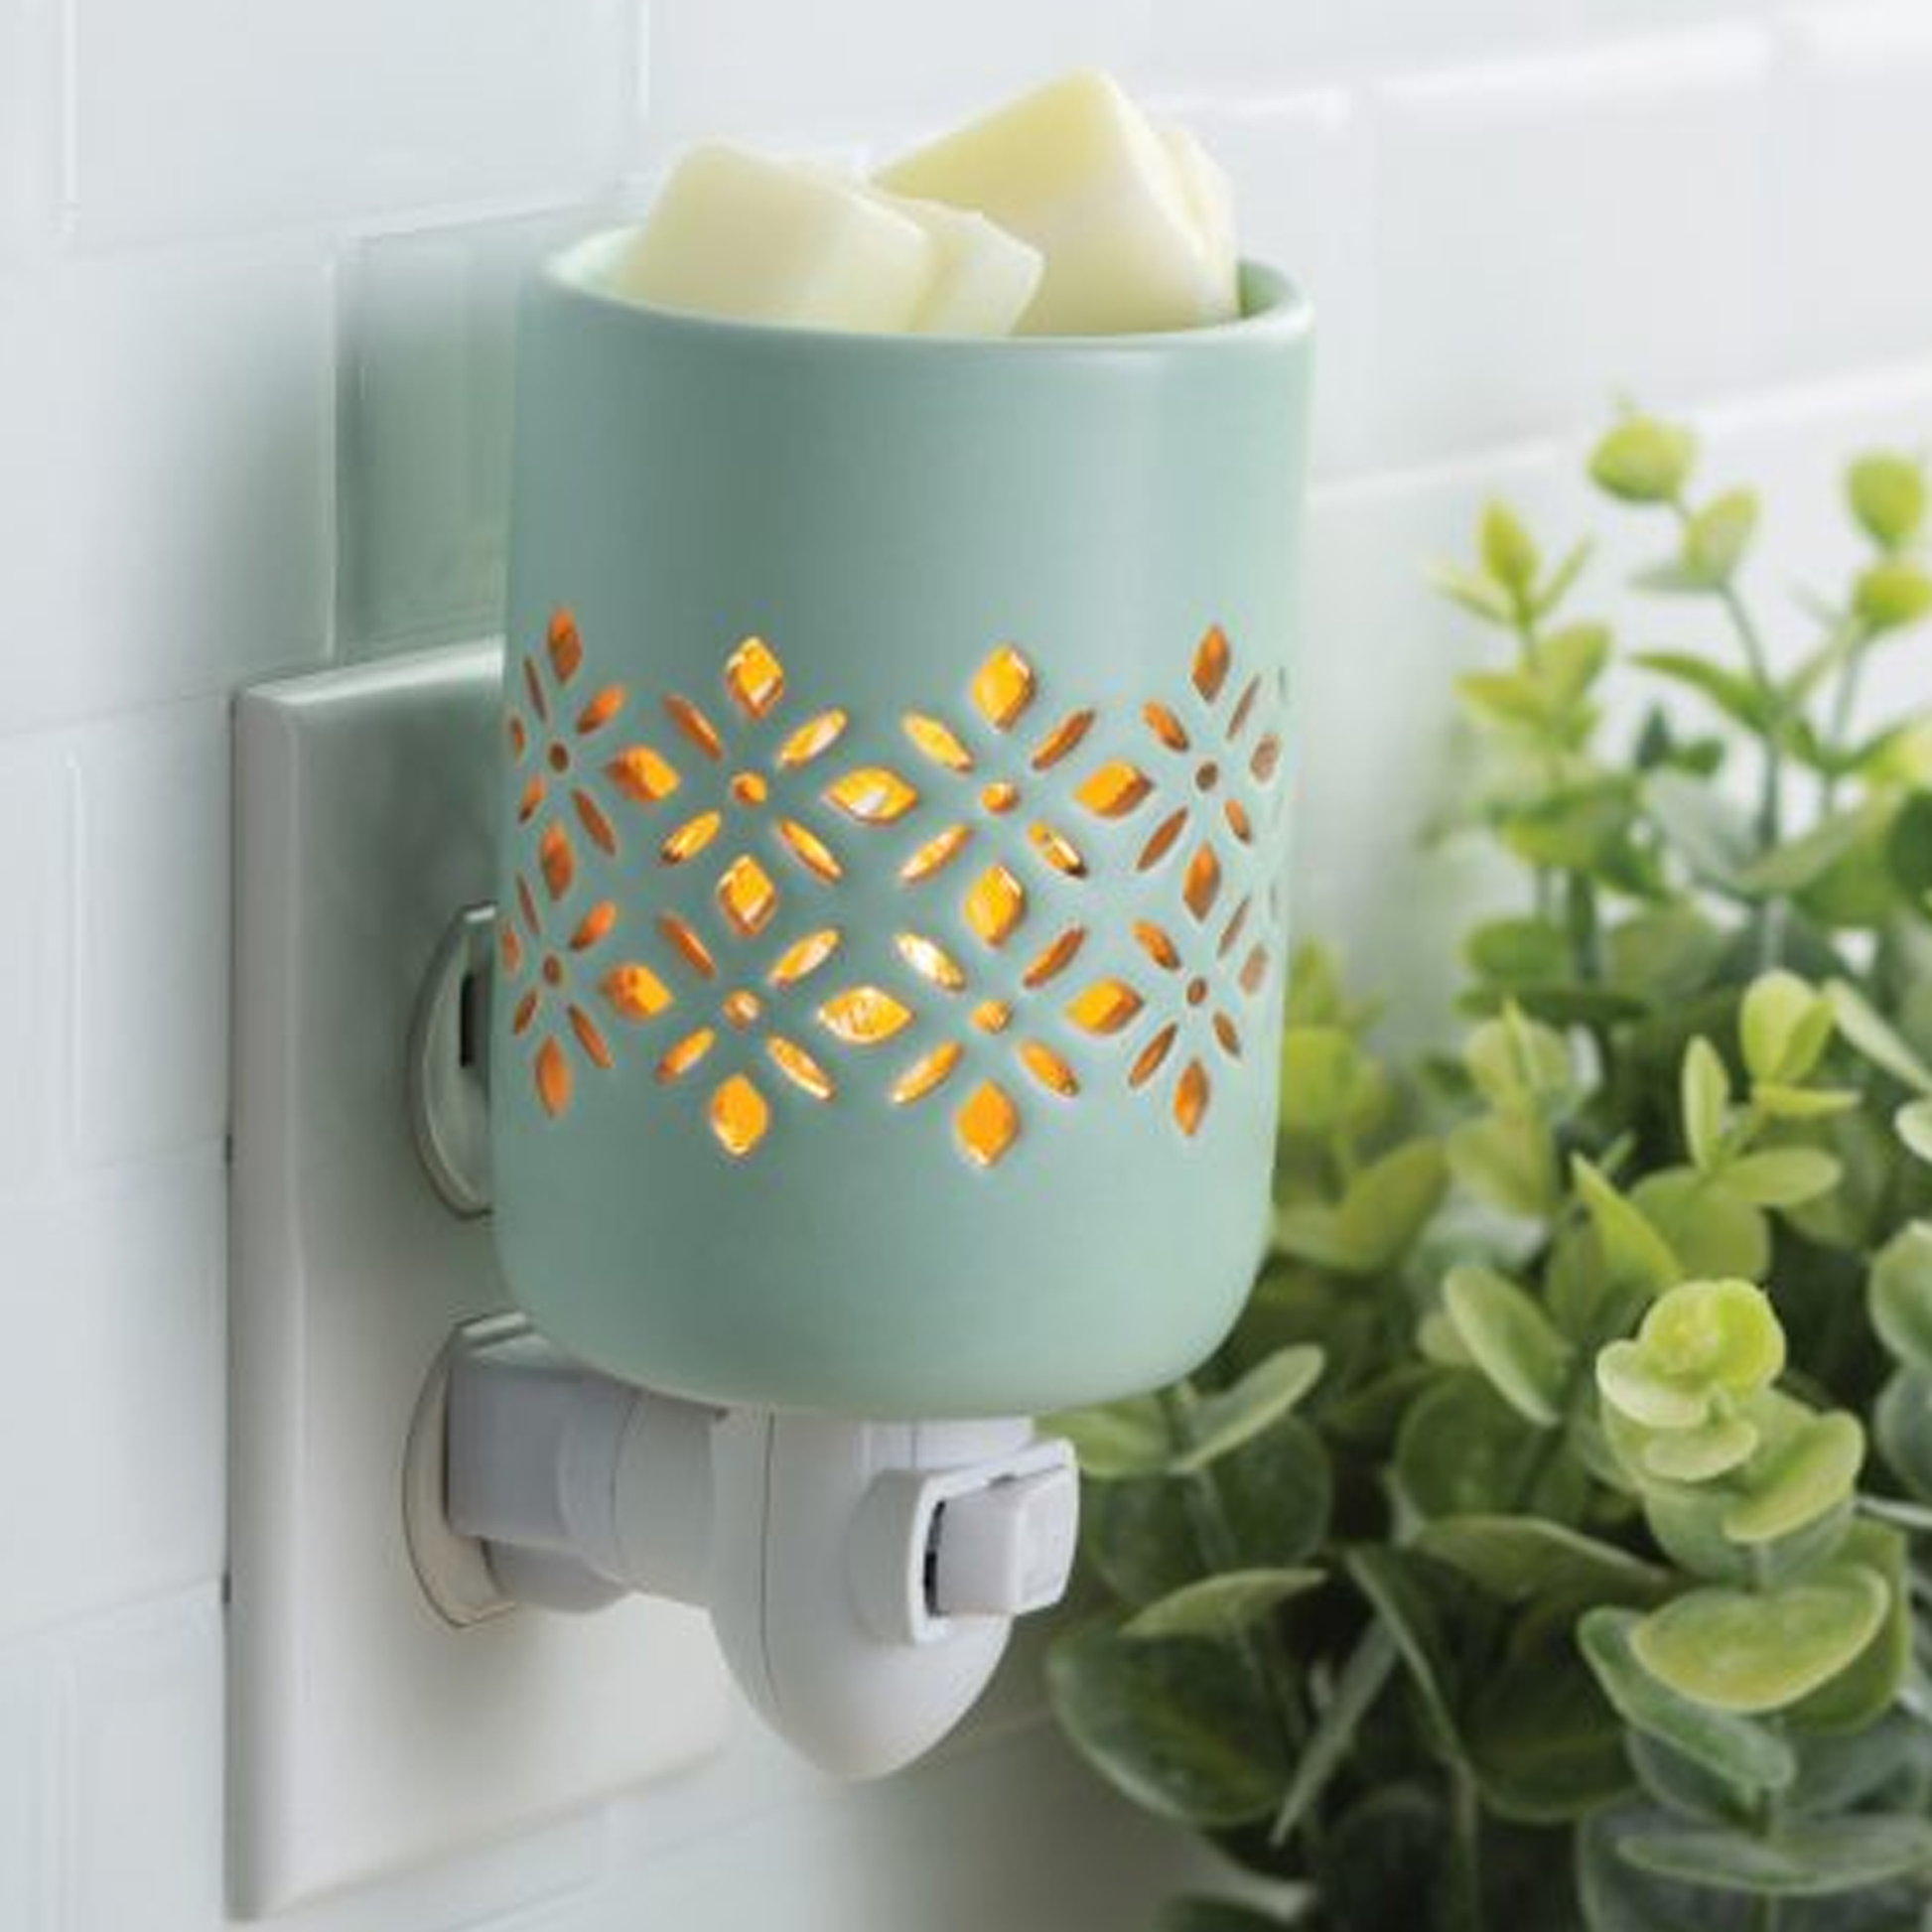 Soft Mint: Plug in Fragrance and Wax Melt Warmer Plugged into a Kitchen Wall | Happy Piranha